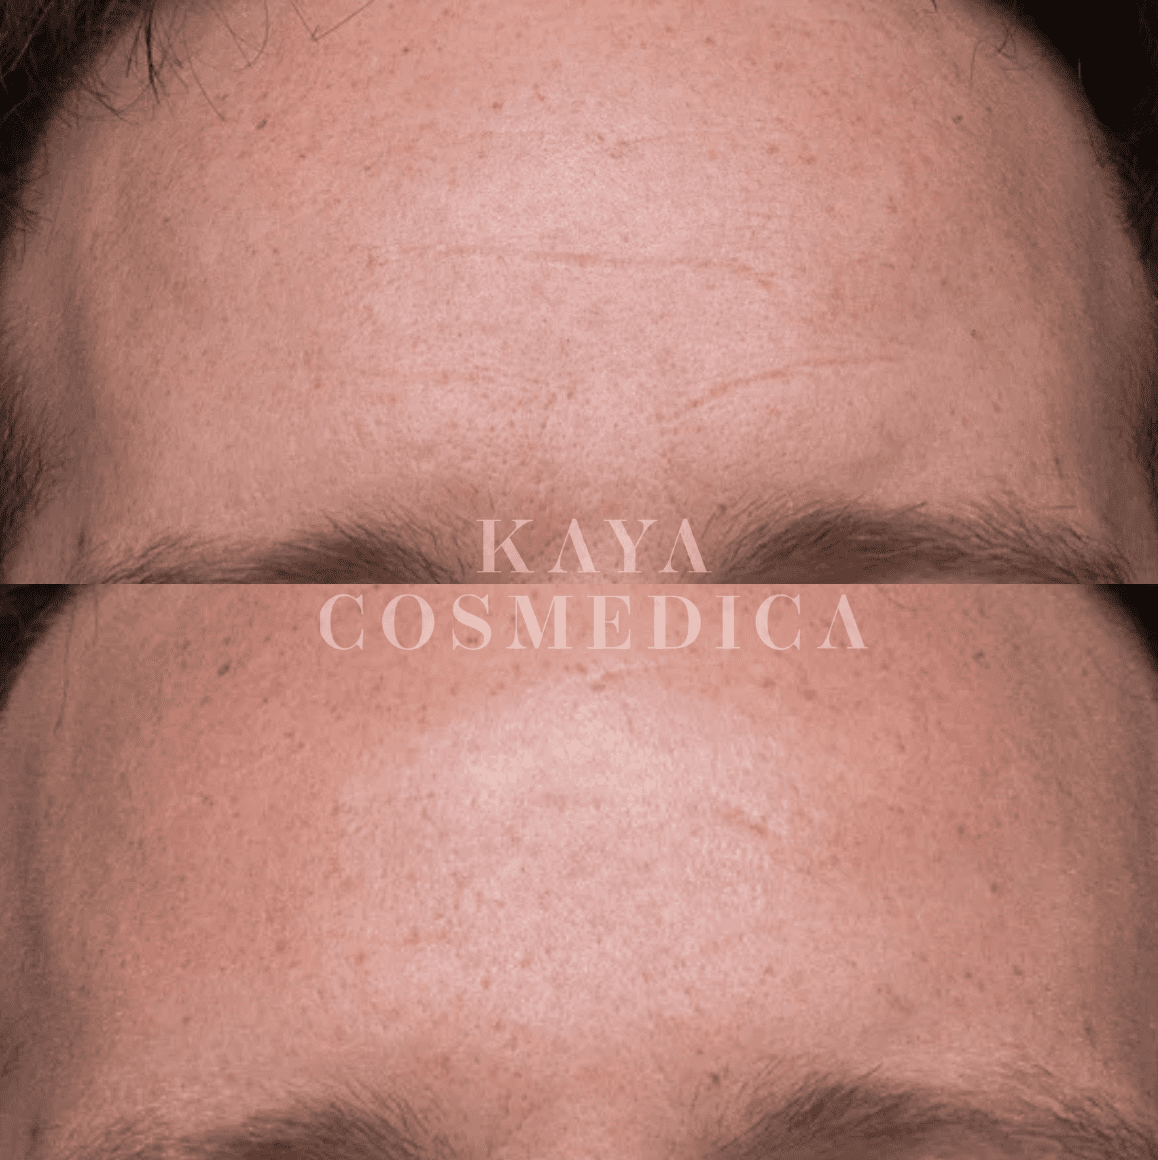 Before and after close-up images of a forehead showing reduced wrinkle appearance due to microneedling, overlaid with text "kaya cosmedica" at the center.